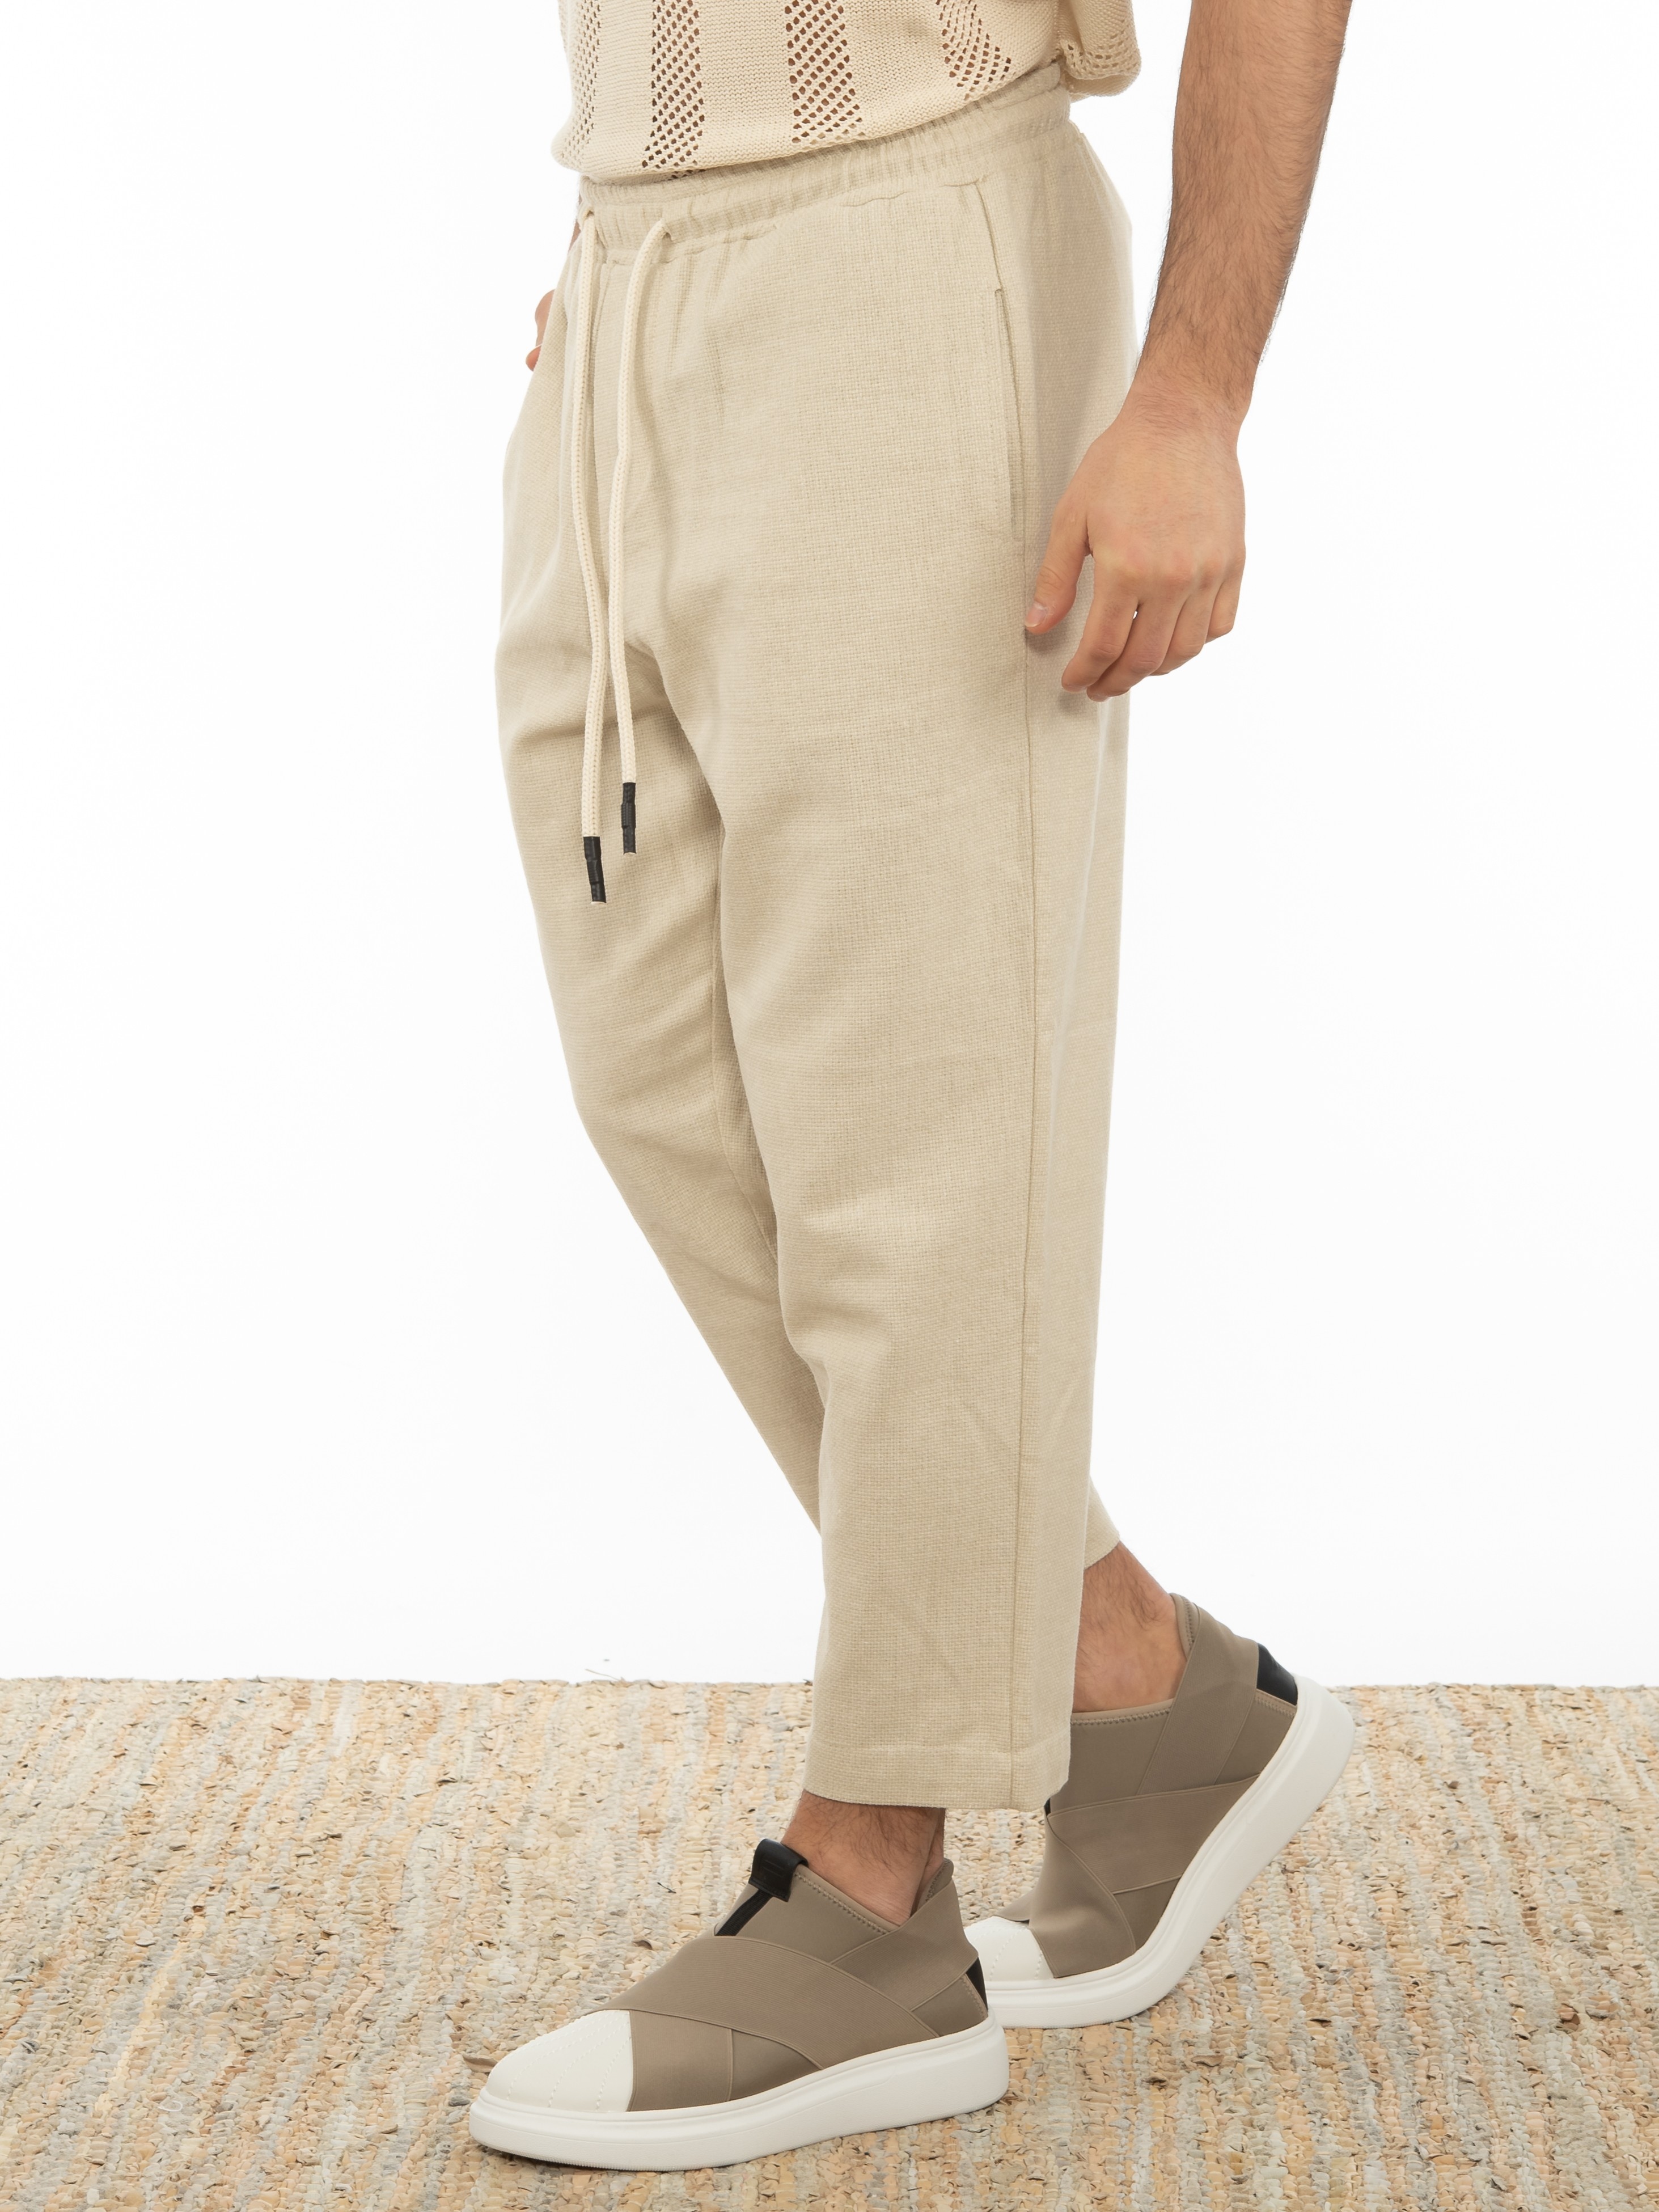 XAGON MAN Chino Trousers 2ZX0064 Beige | CENTROstile Size XX - Large